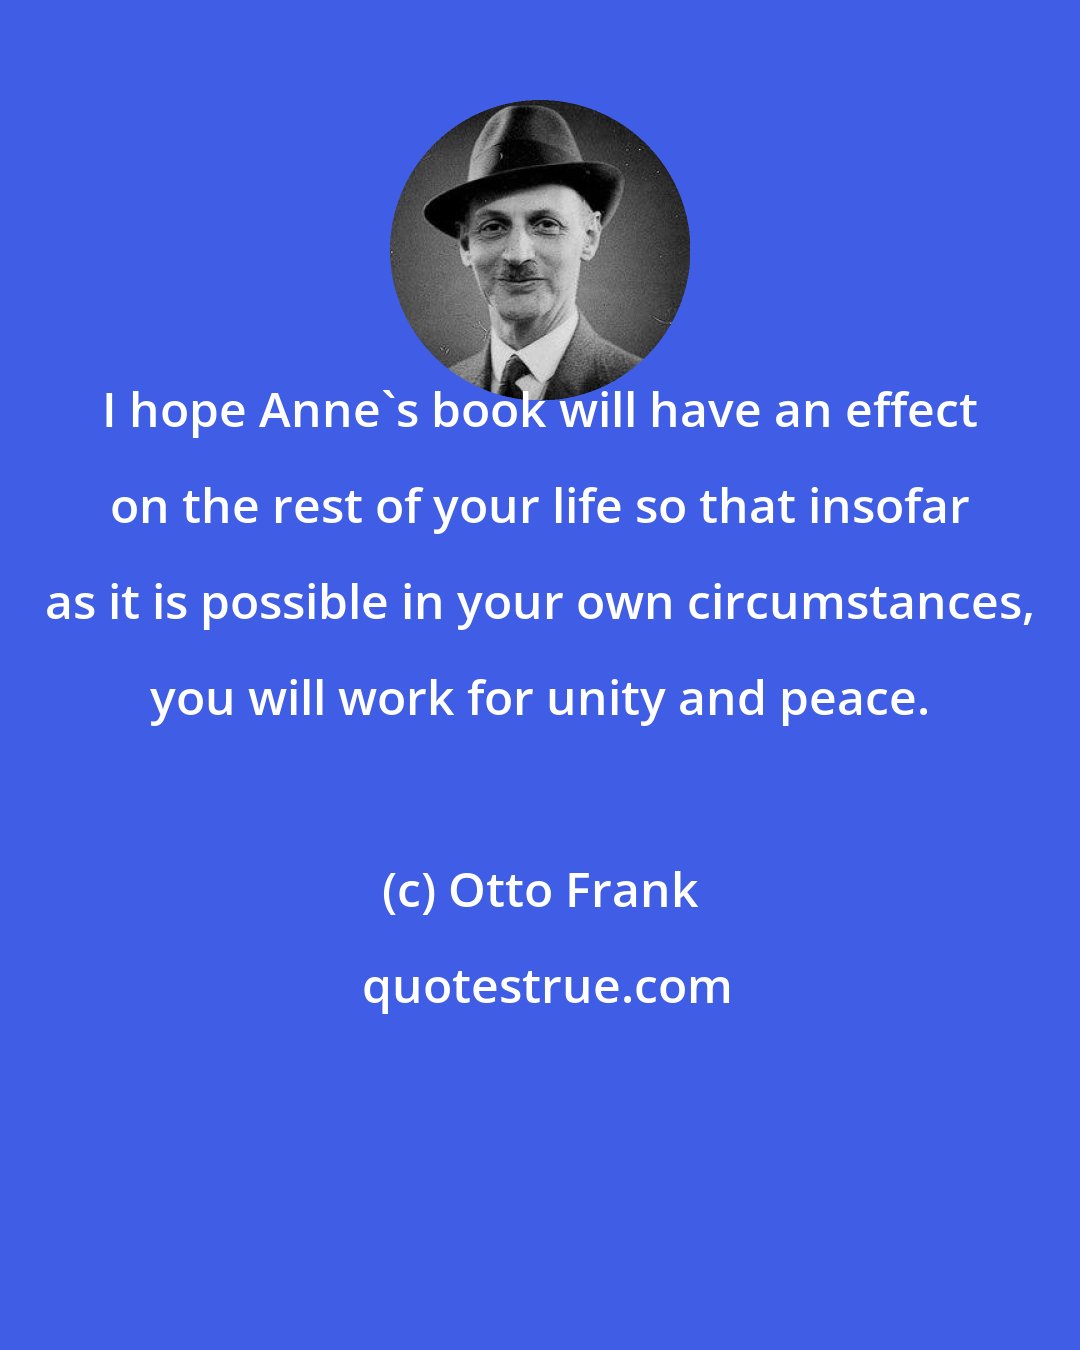 Otto Frank: I hope Anne's book will have an effect on the rest of your life so that insofar as it is possible in your own circumstances, you will work for unity and peace.